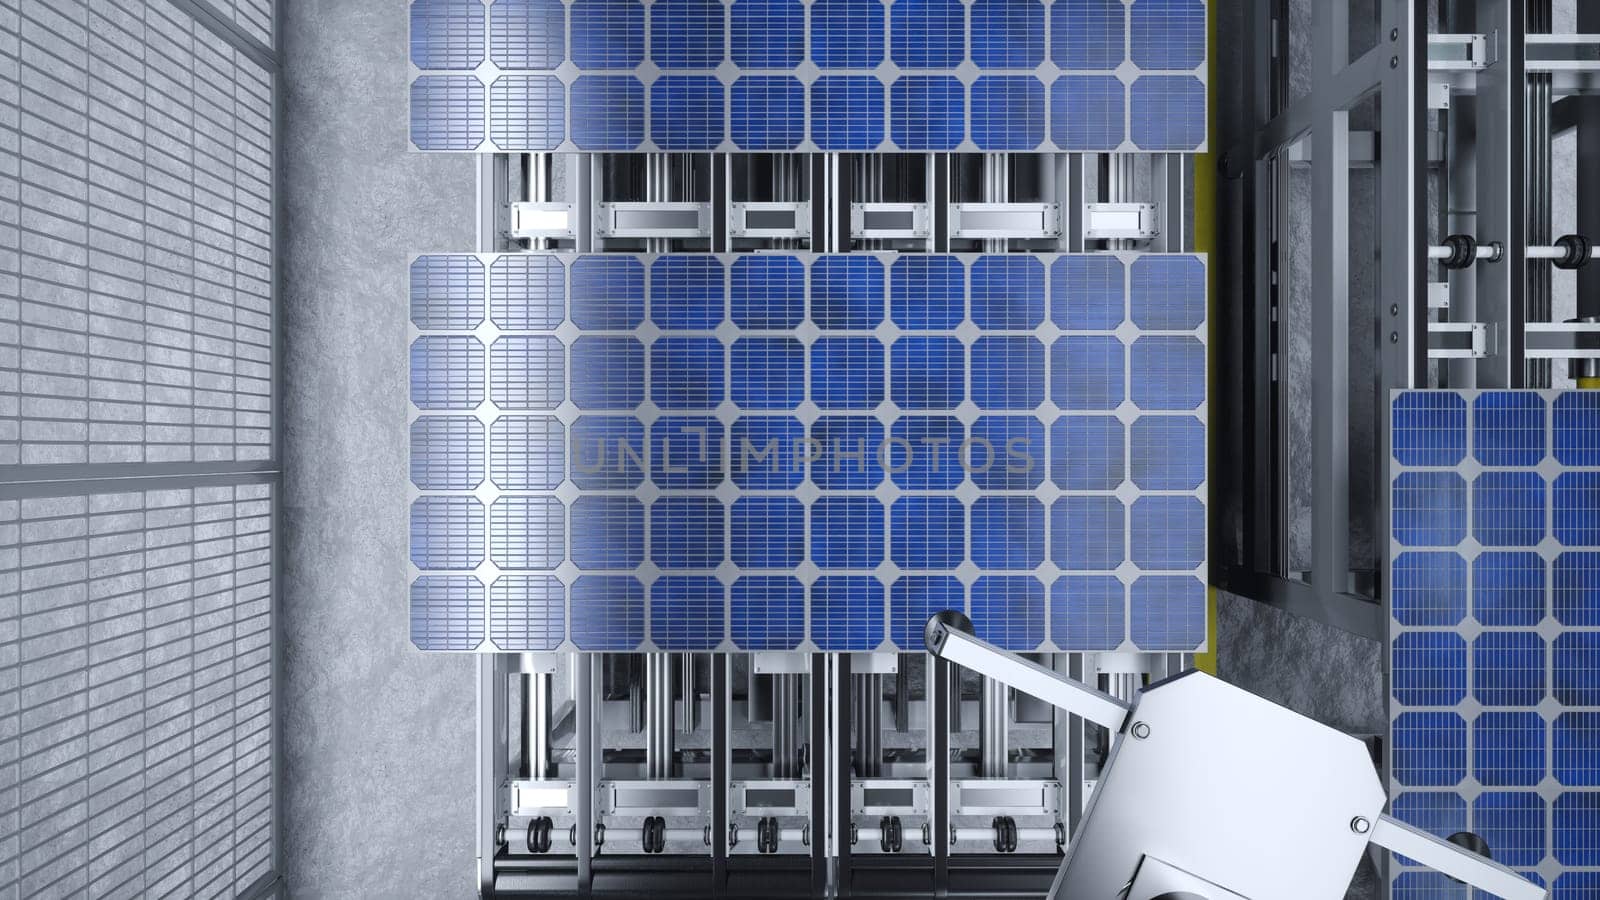 POV of robotic arms moving solar panels on conveyor belts during high tech production process in clean energy factory, 3D render. Machinery unit placing PV cells on assembly lines